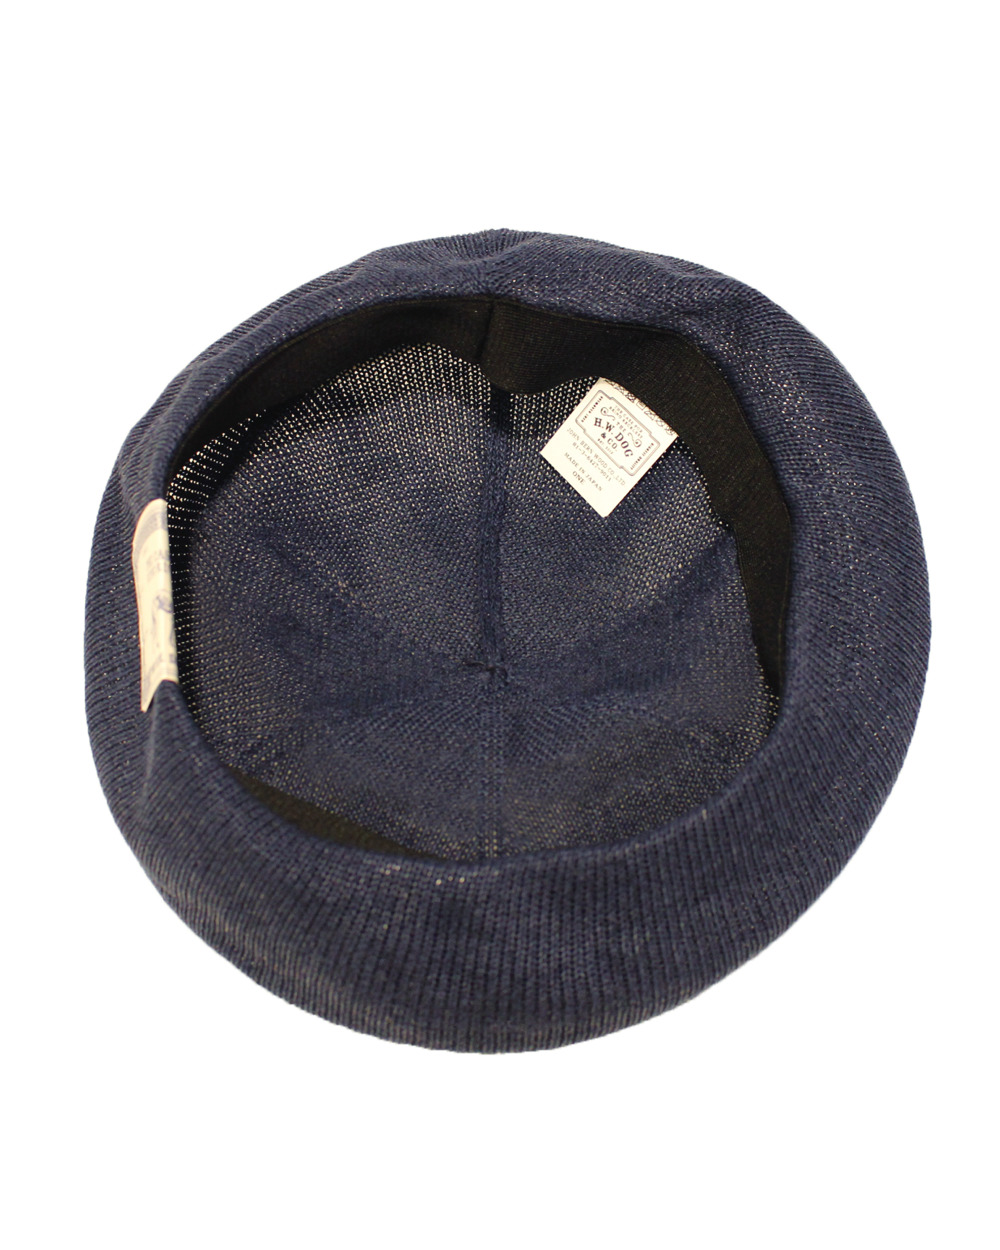 THE H.W. DOG & CO. / PW6200 (NAVY)